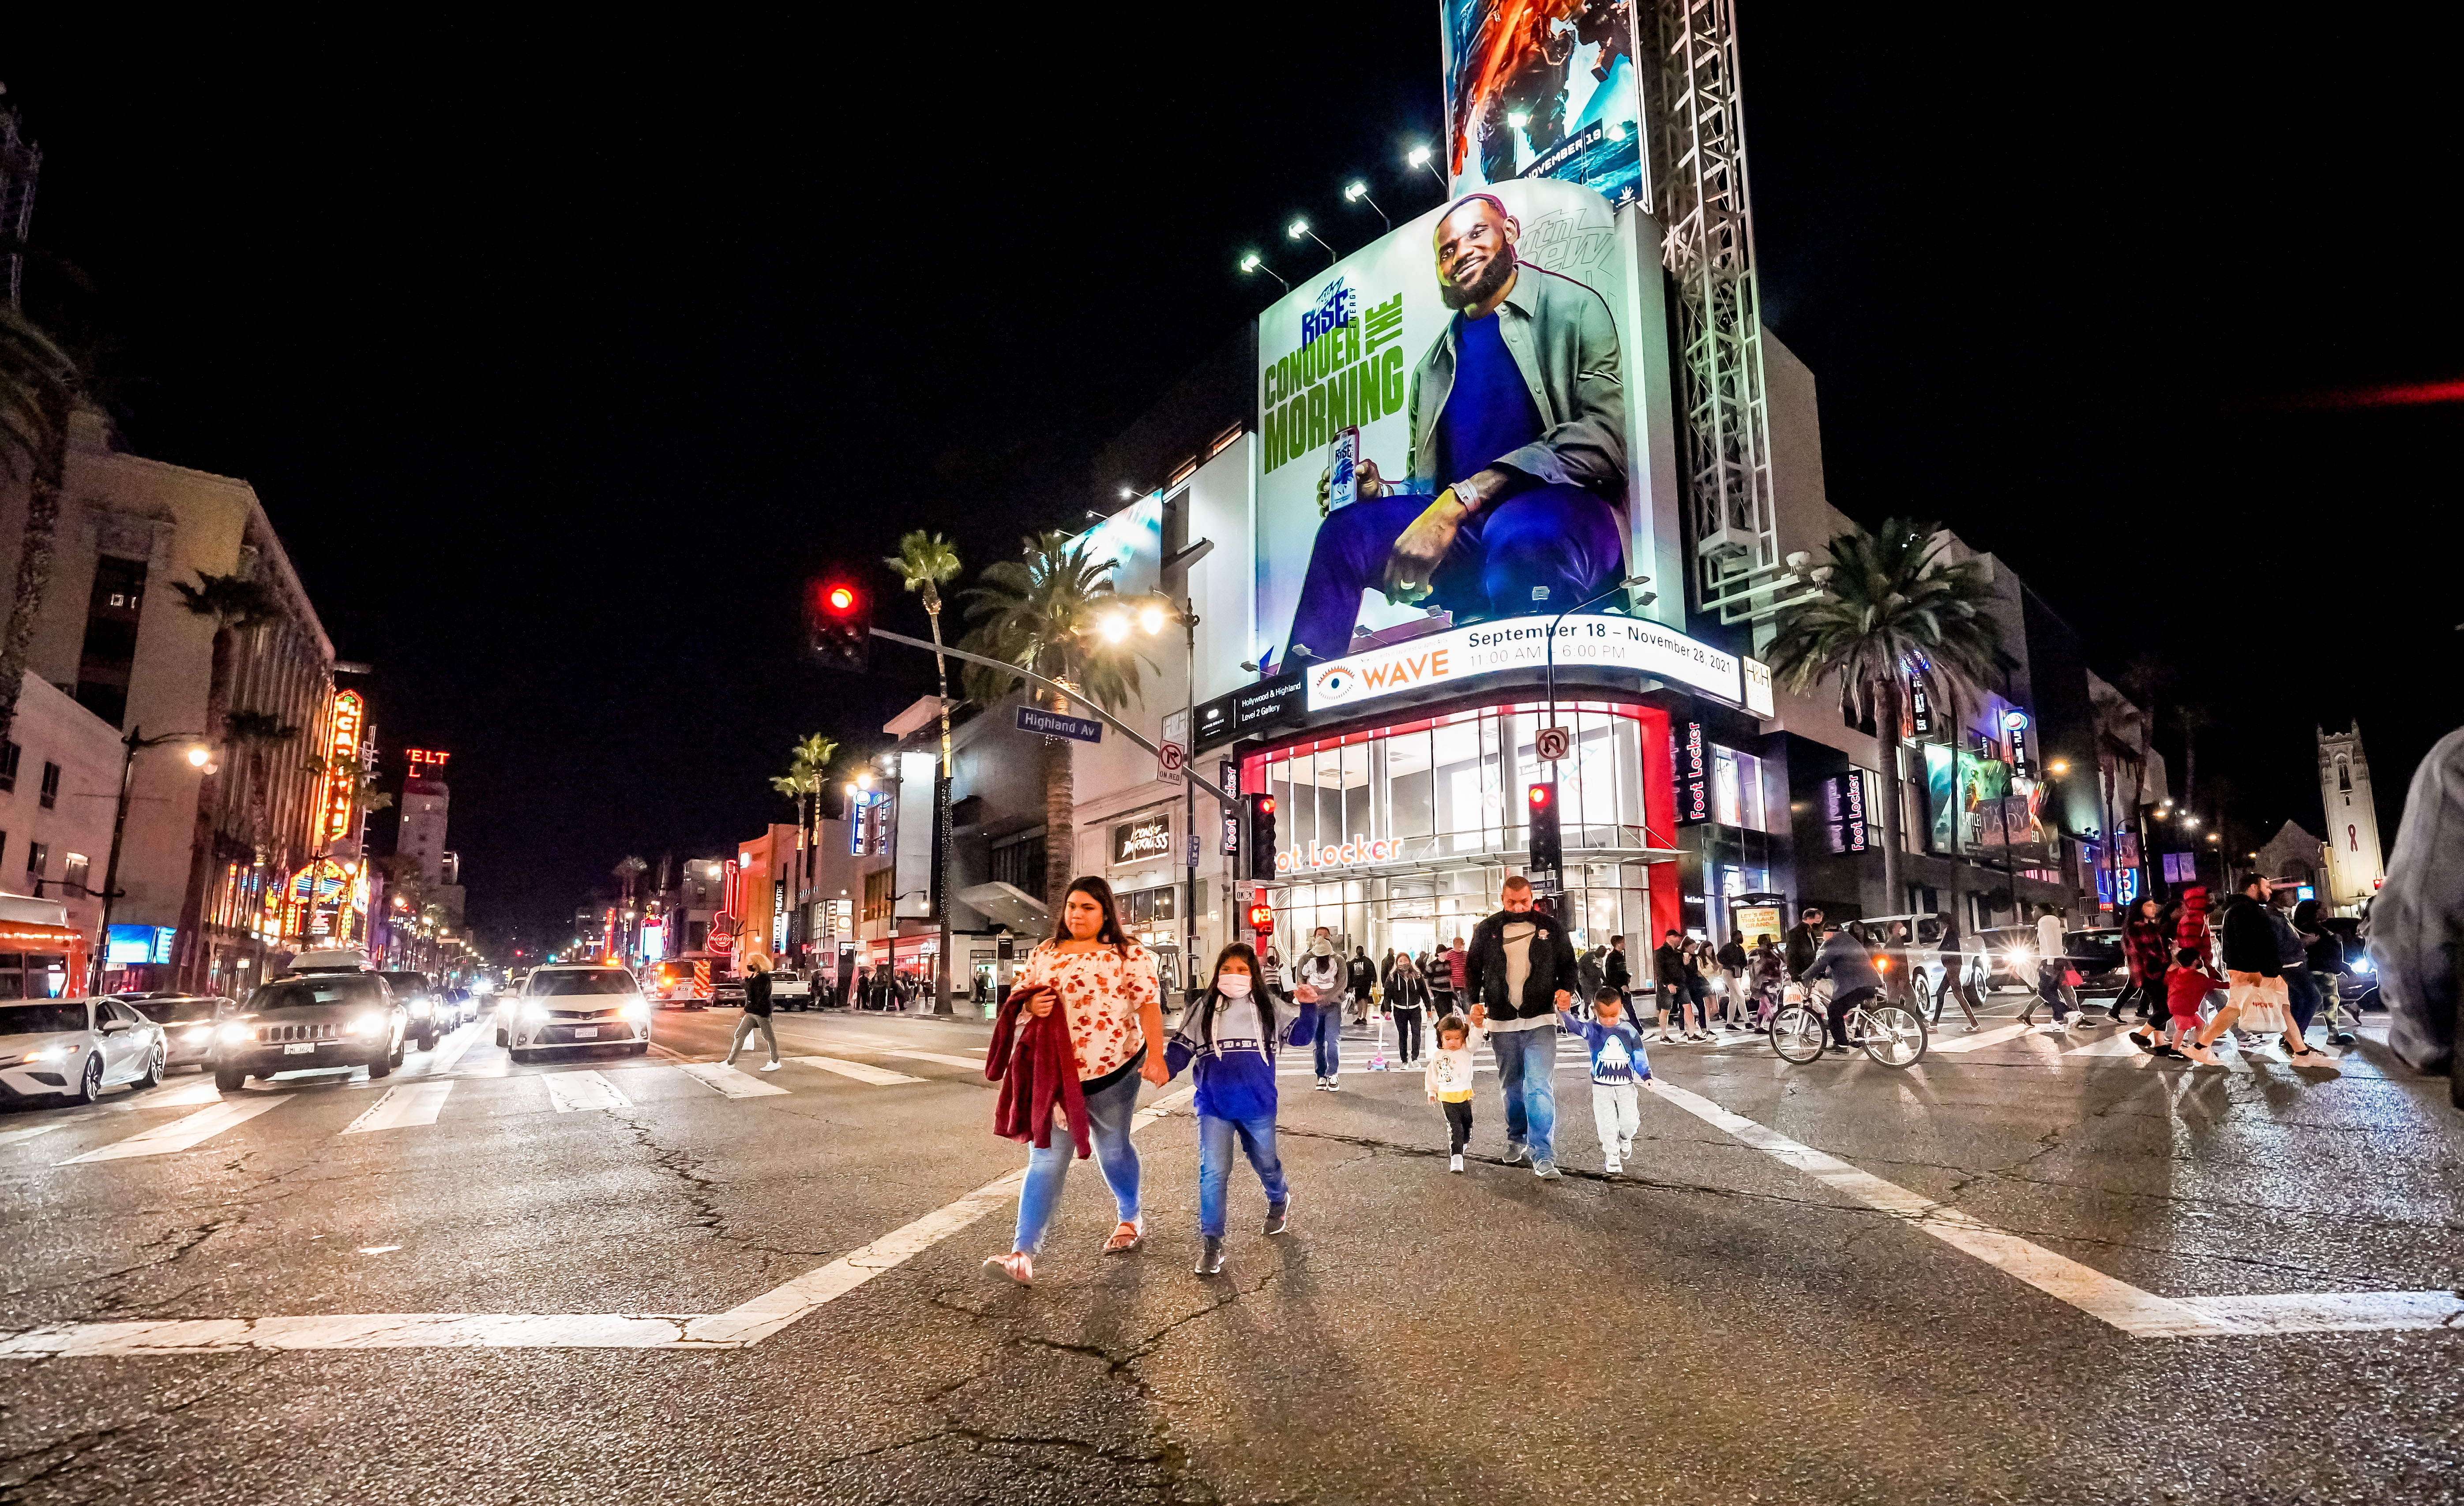 Hollywood and Highland, Hollywood CA (Photo by Howard Wise)